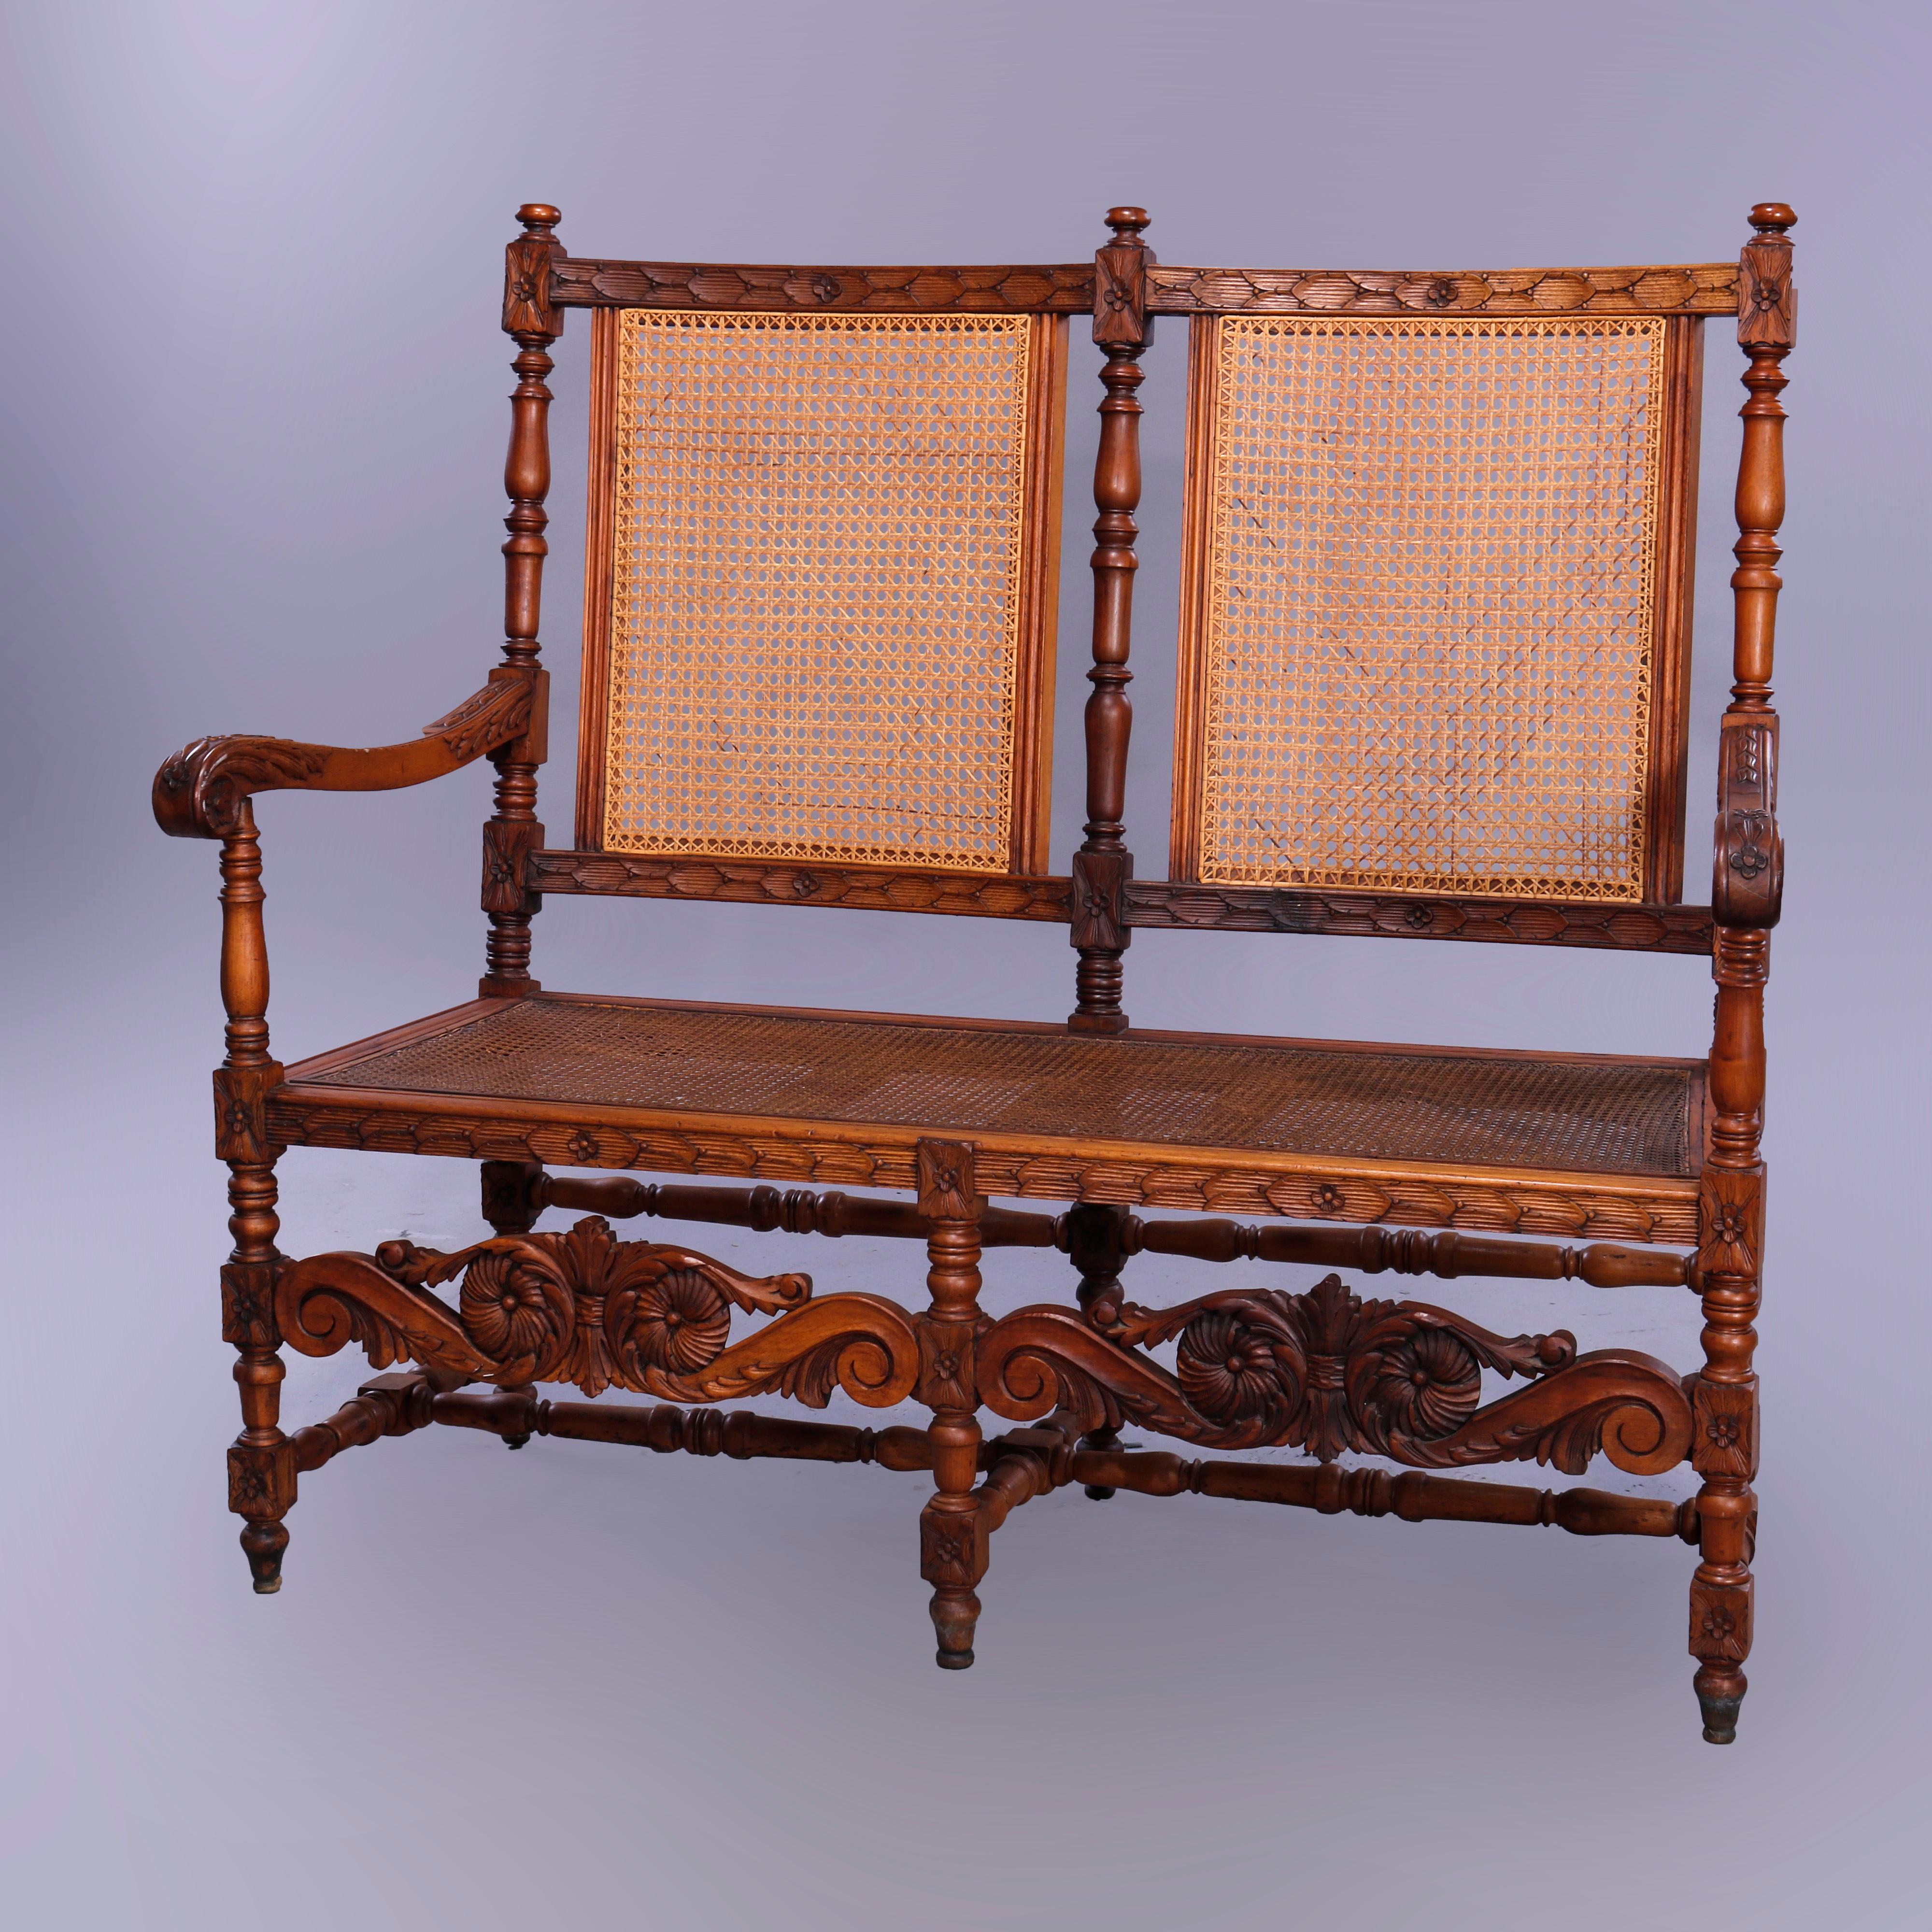 An antique Continental Edwardian settee bench offers walnut frame with carved foliate elements, cane back and seat, carved acanthus scroll form arms, raised on turned legs having rosettes and caved floral stretcher, c1900

Measures - 46.5''W x